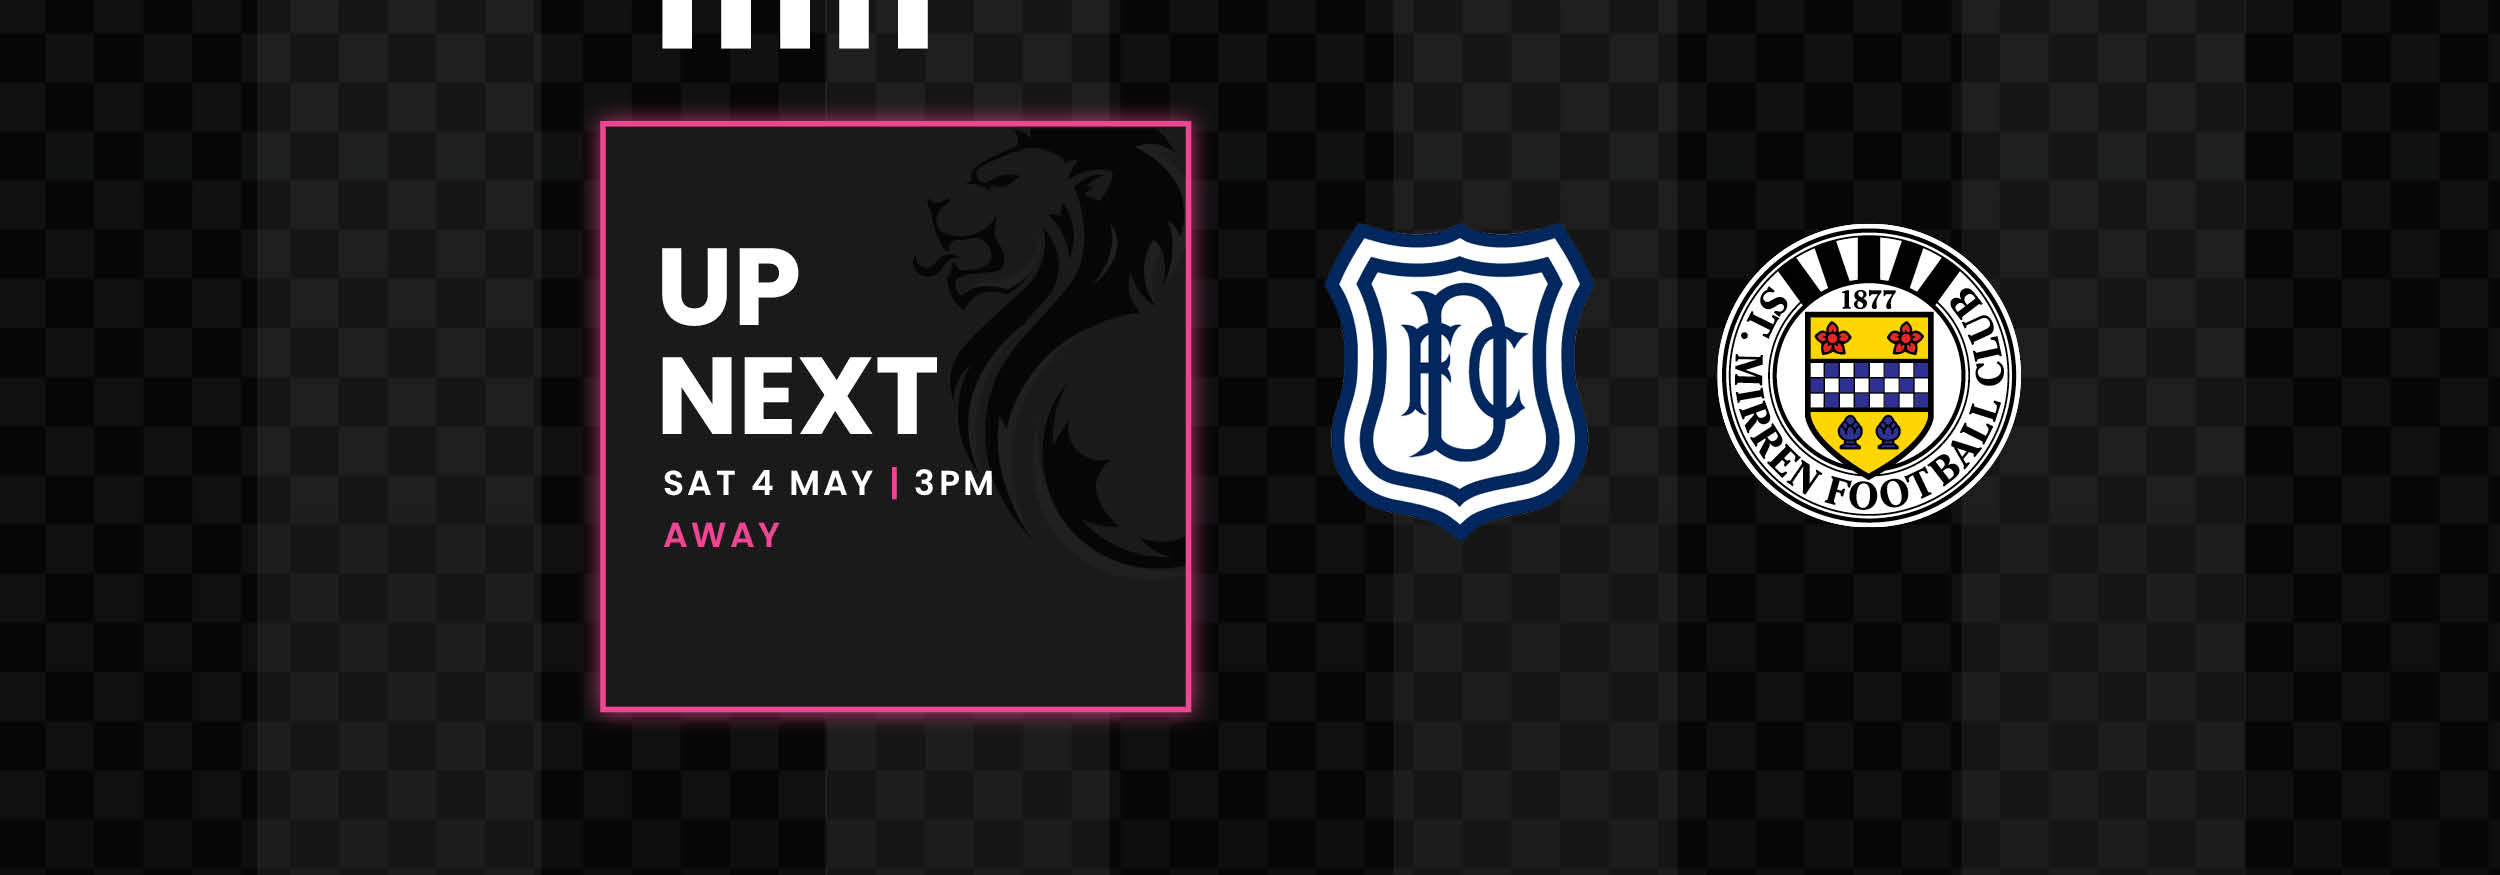 Up Next: Dundee v St Mirren (4th May)